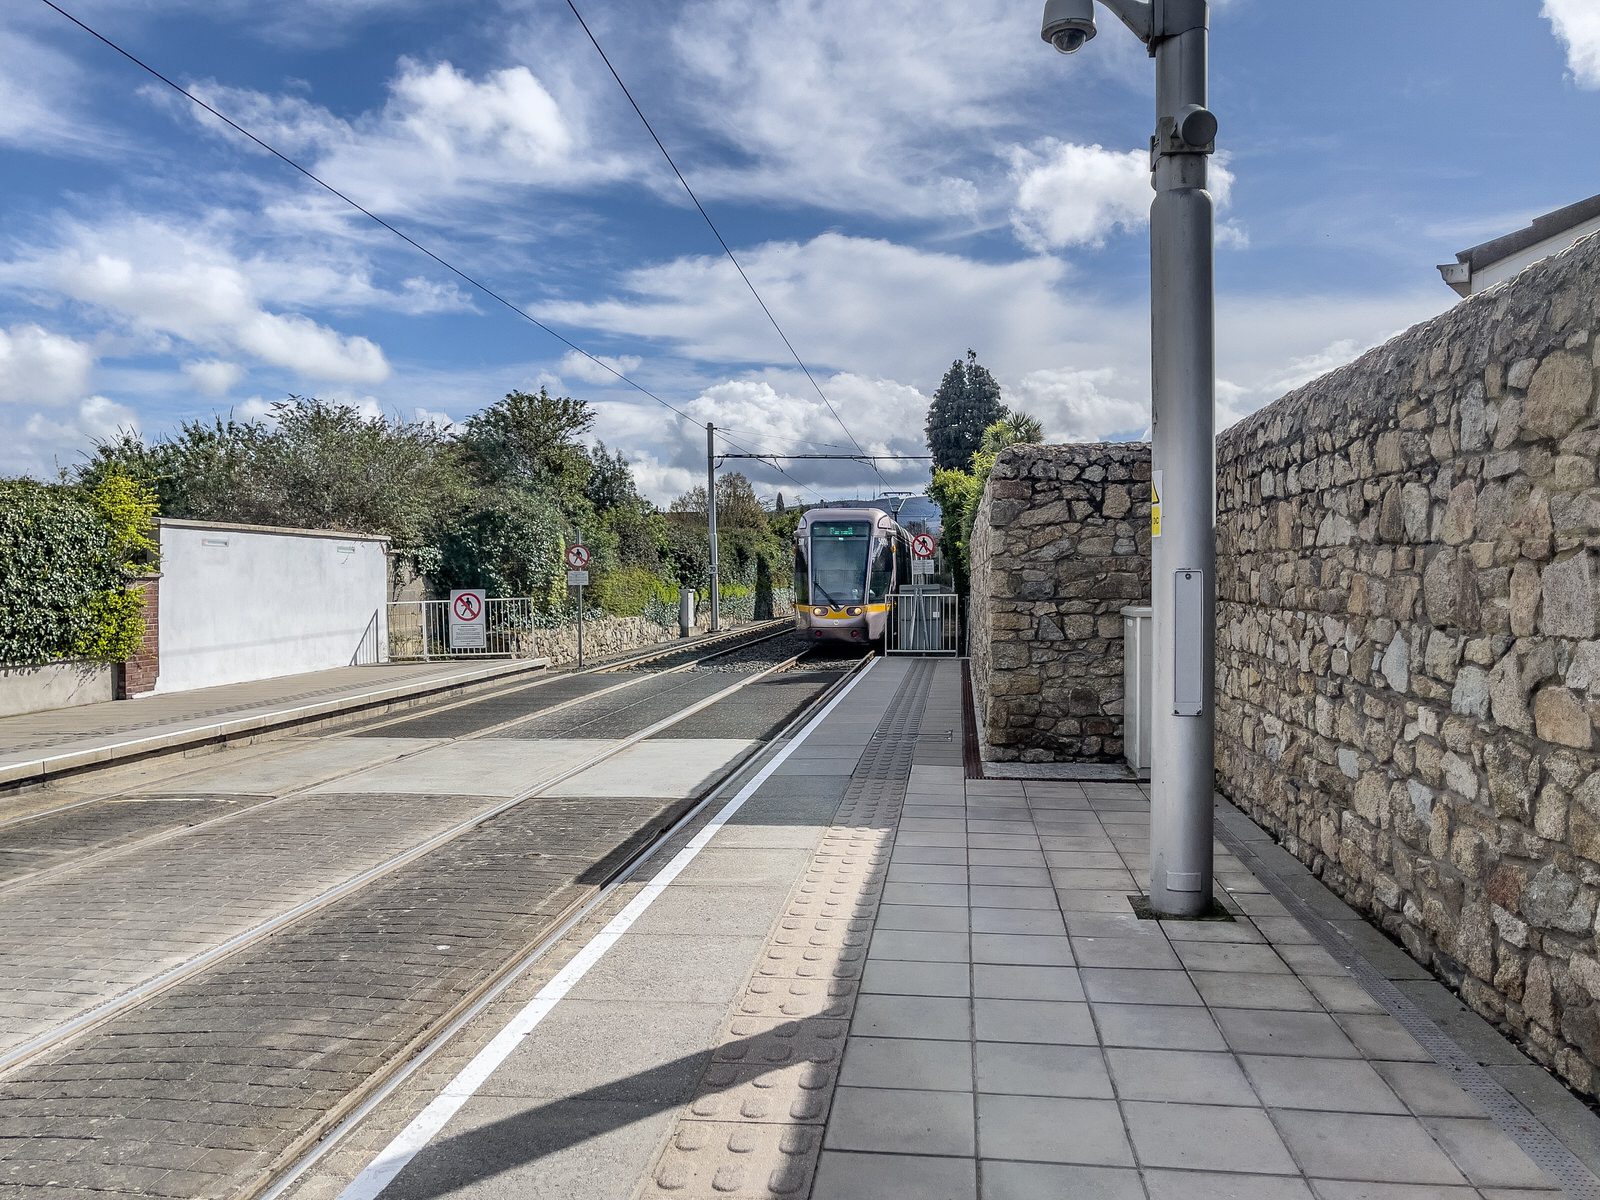 THE LUAS TRAM STOP AT WINDY ARBOUR AND THE IMMEDIATE AREA 045